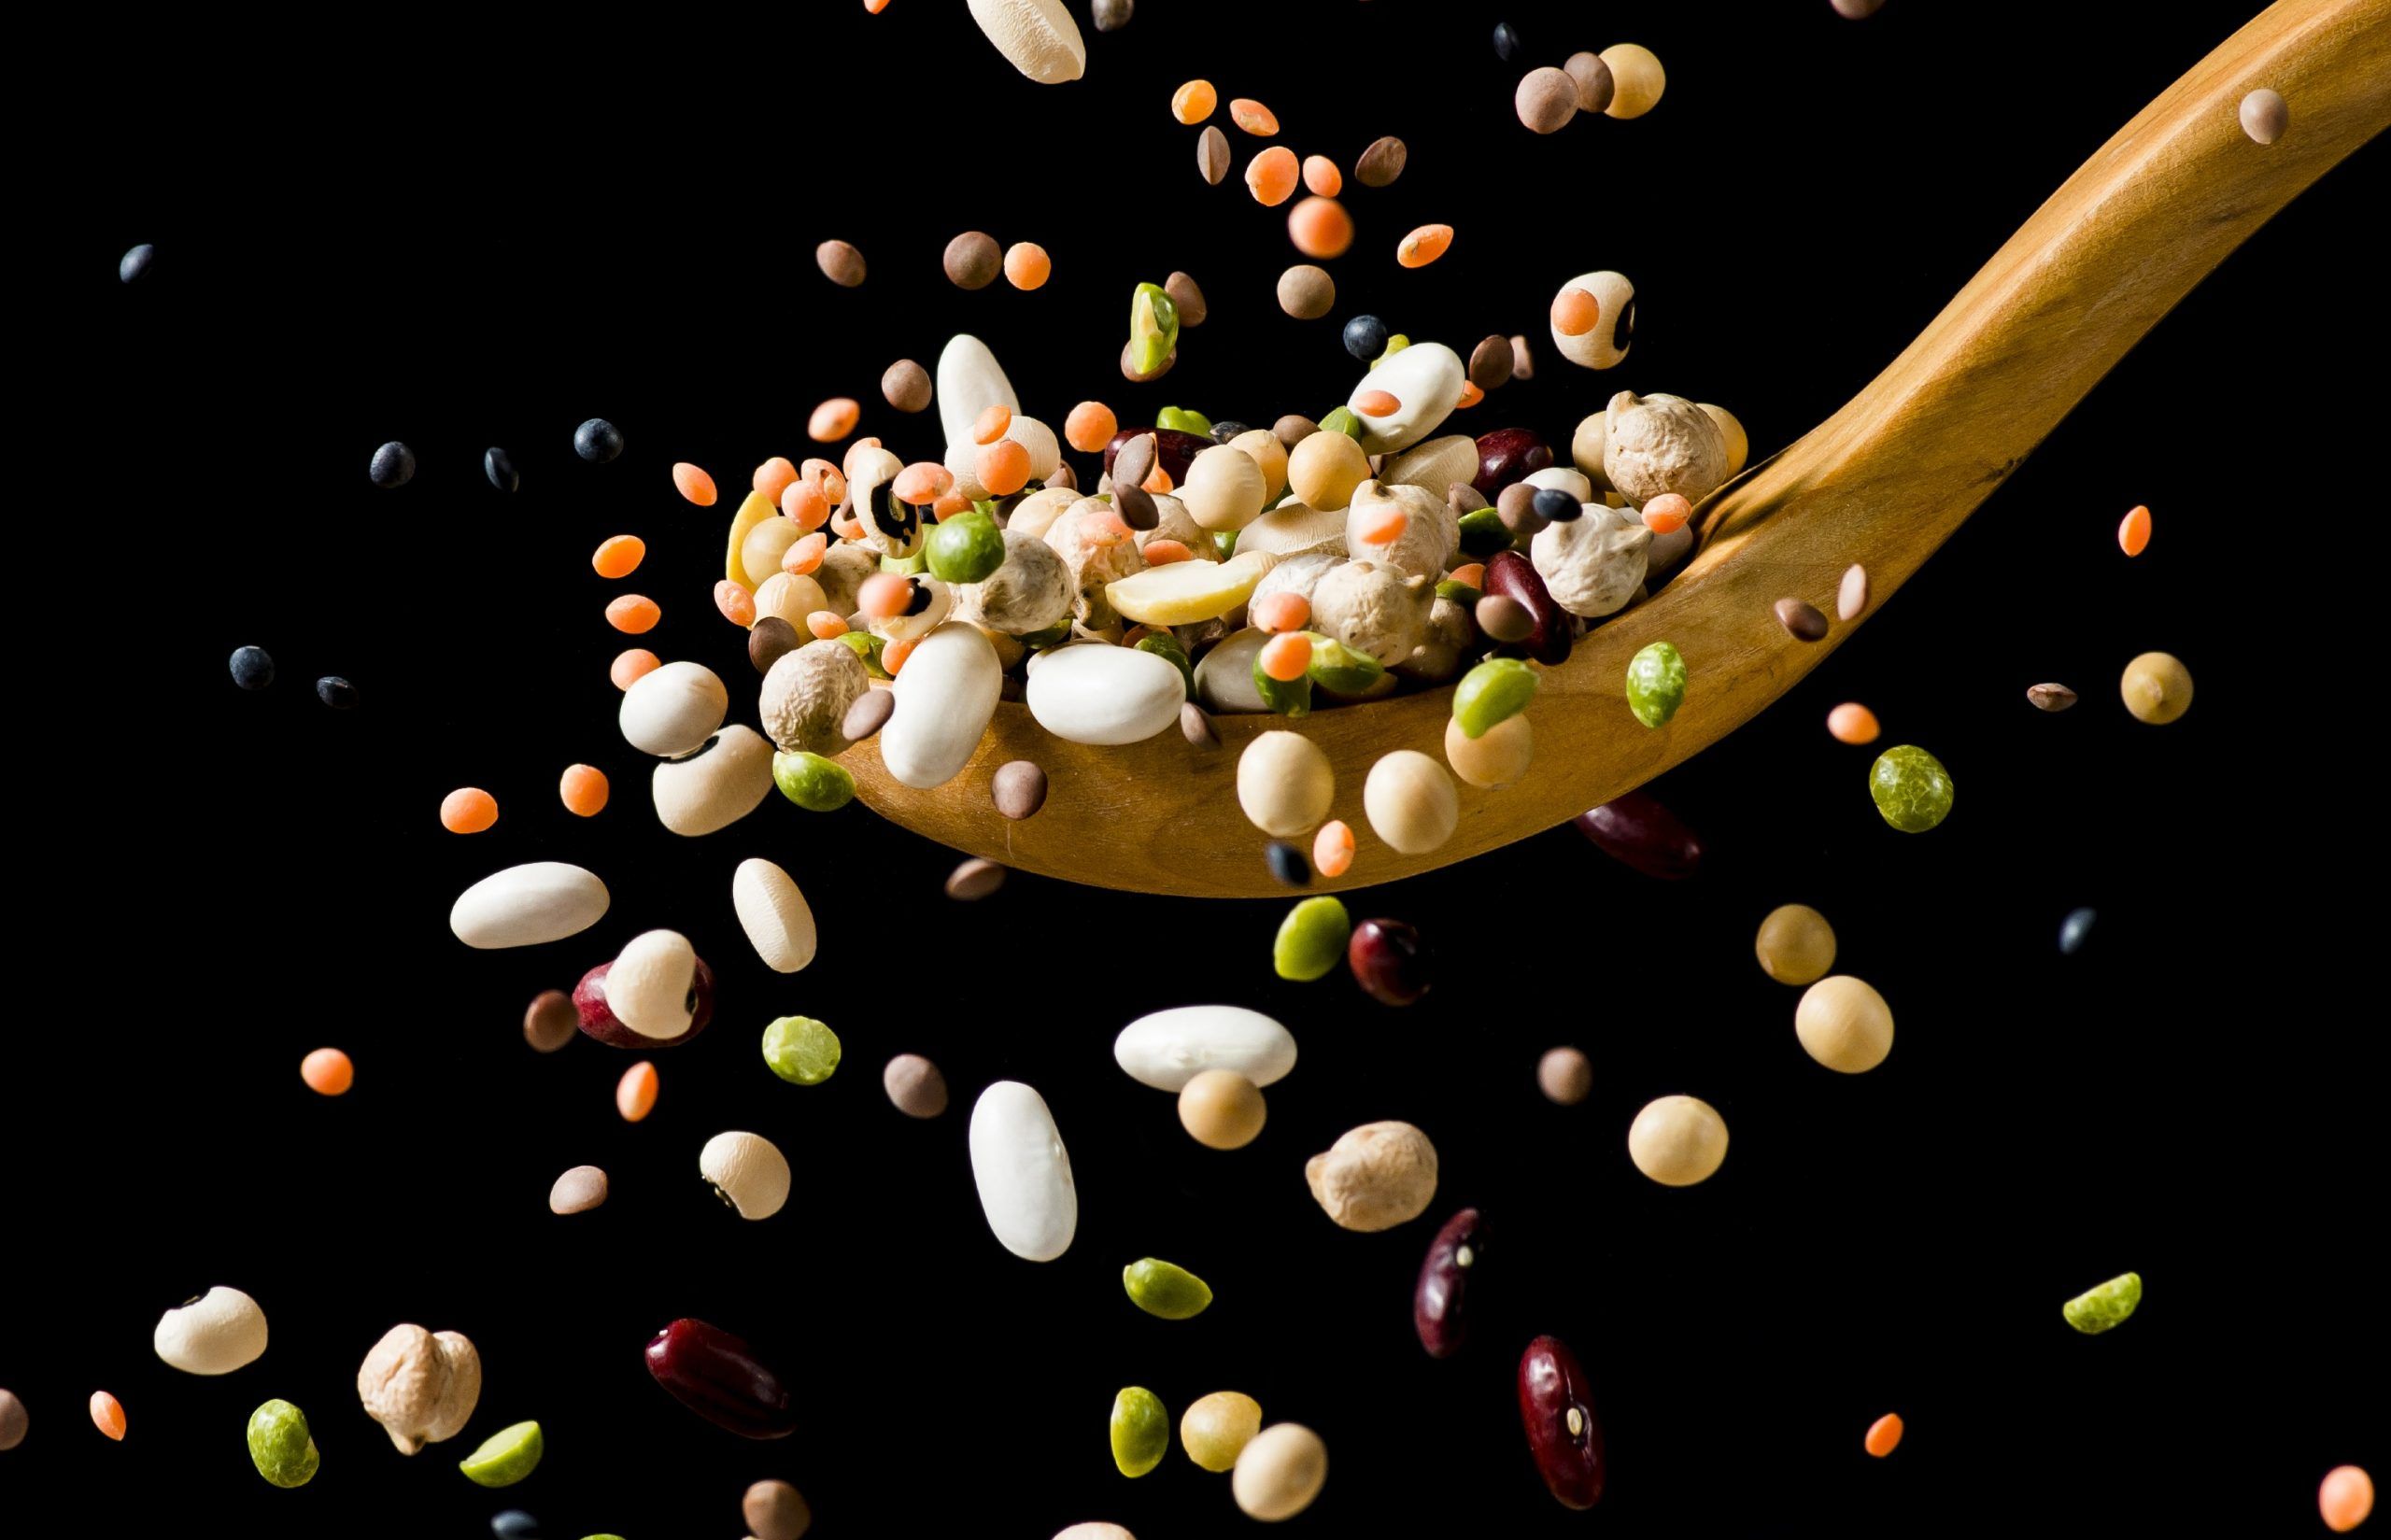 If you suffer from gout, you might want to add more plant-based proteins to your diet.